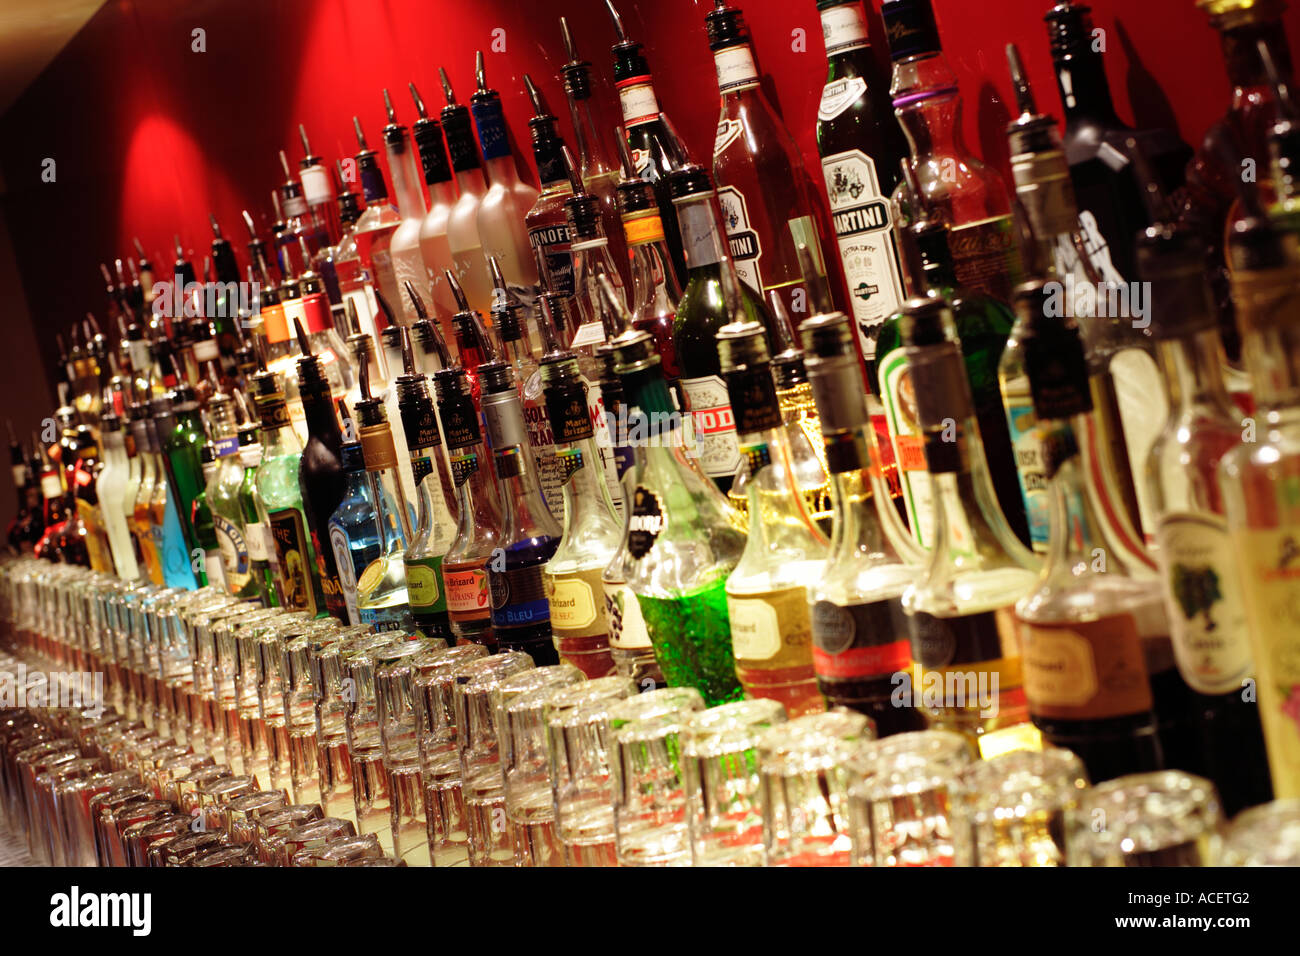 Row of alcoholic drink bottles and spirits behind a bar with glasses Stock Photo